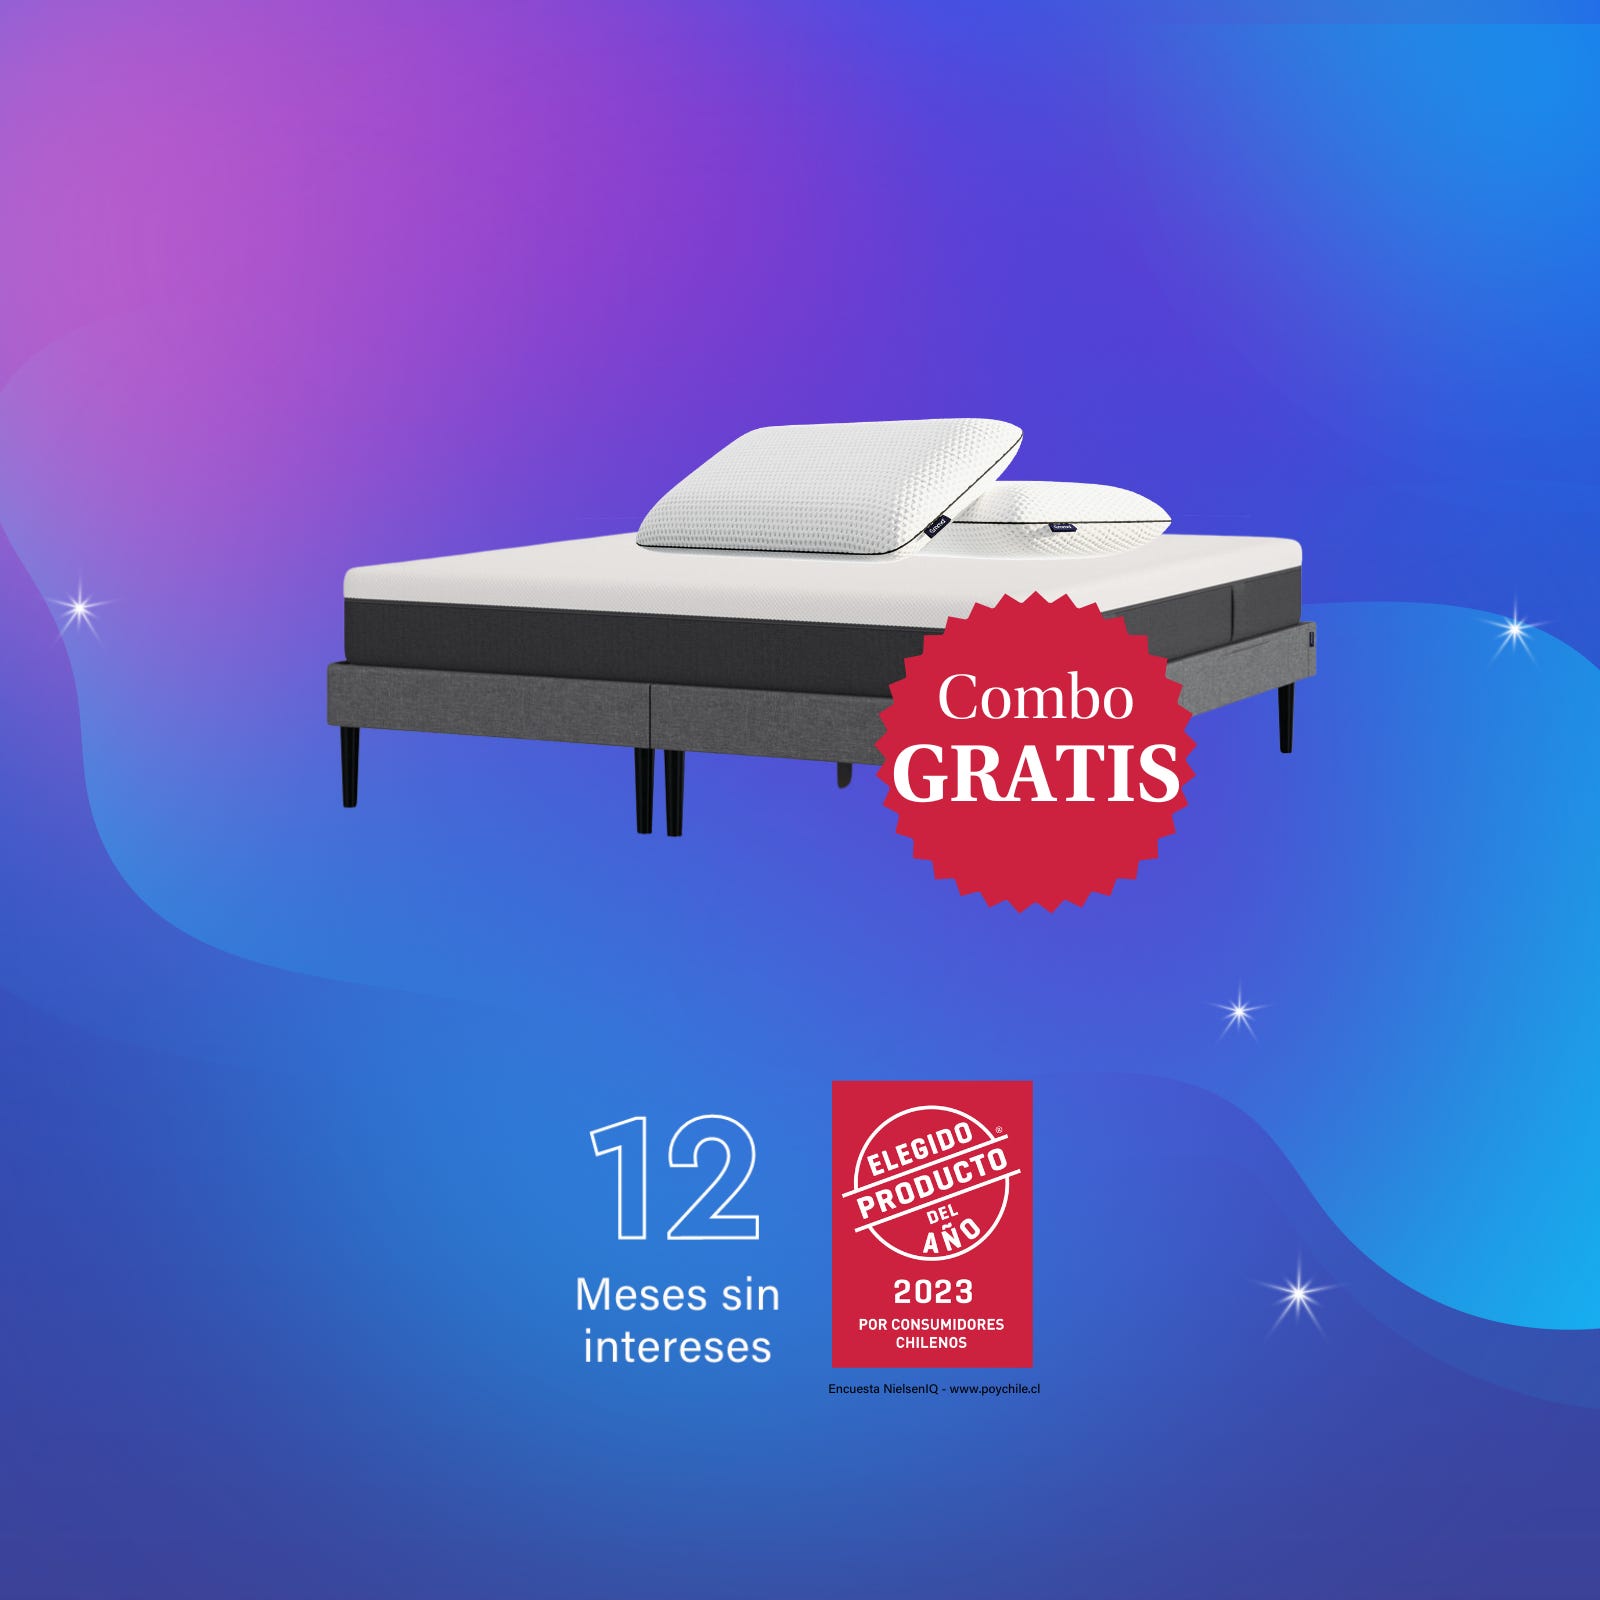 05.29.2023_PC_Ofertas_Bed_Mobile.png